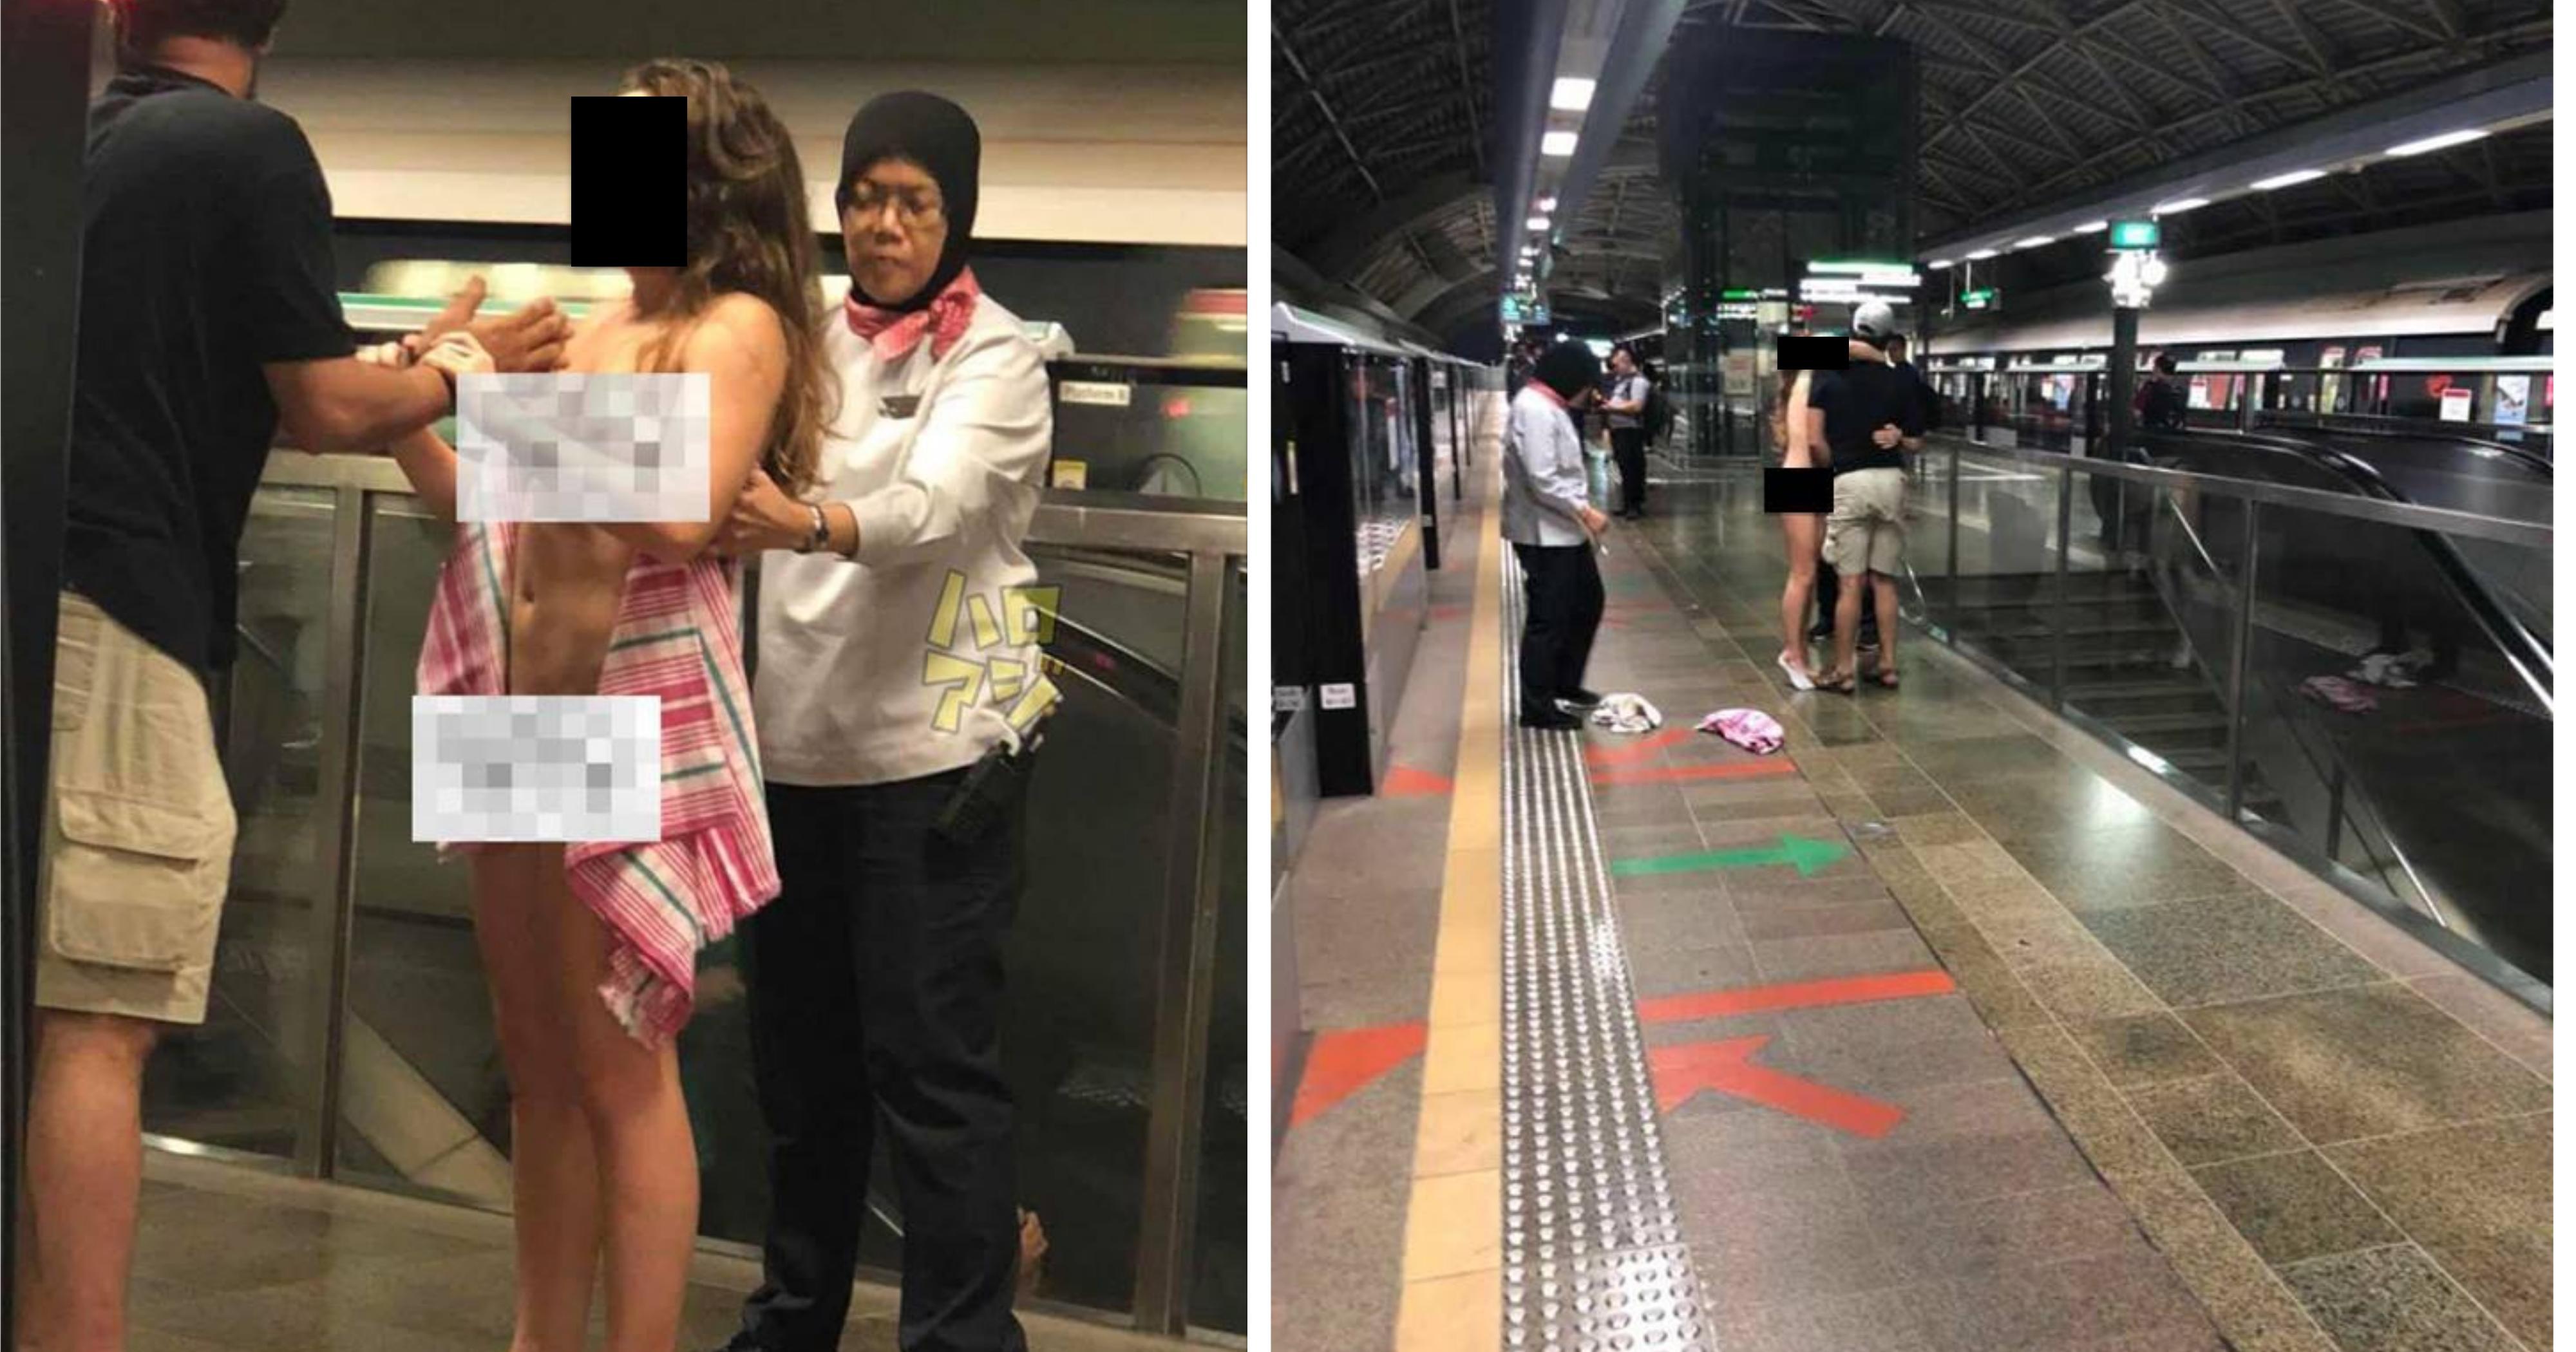 Naked woman, 35, at Pioneer MRT Station arrested - Stomp 